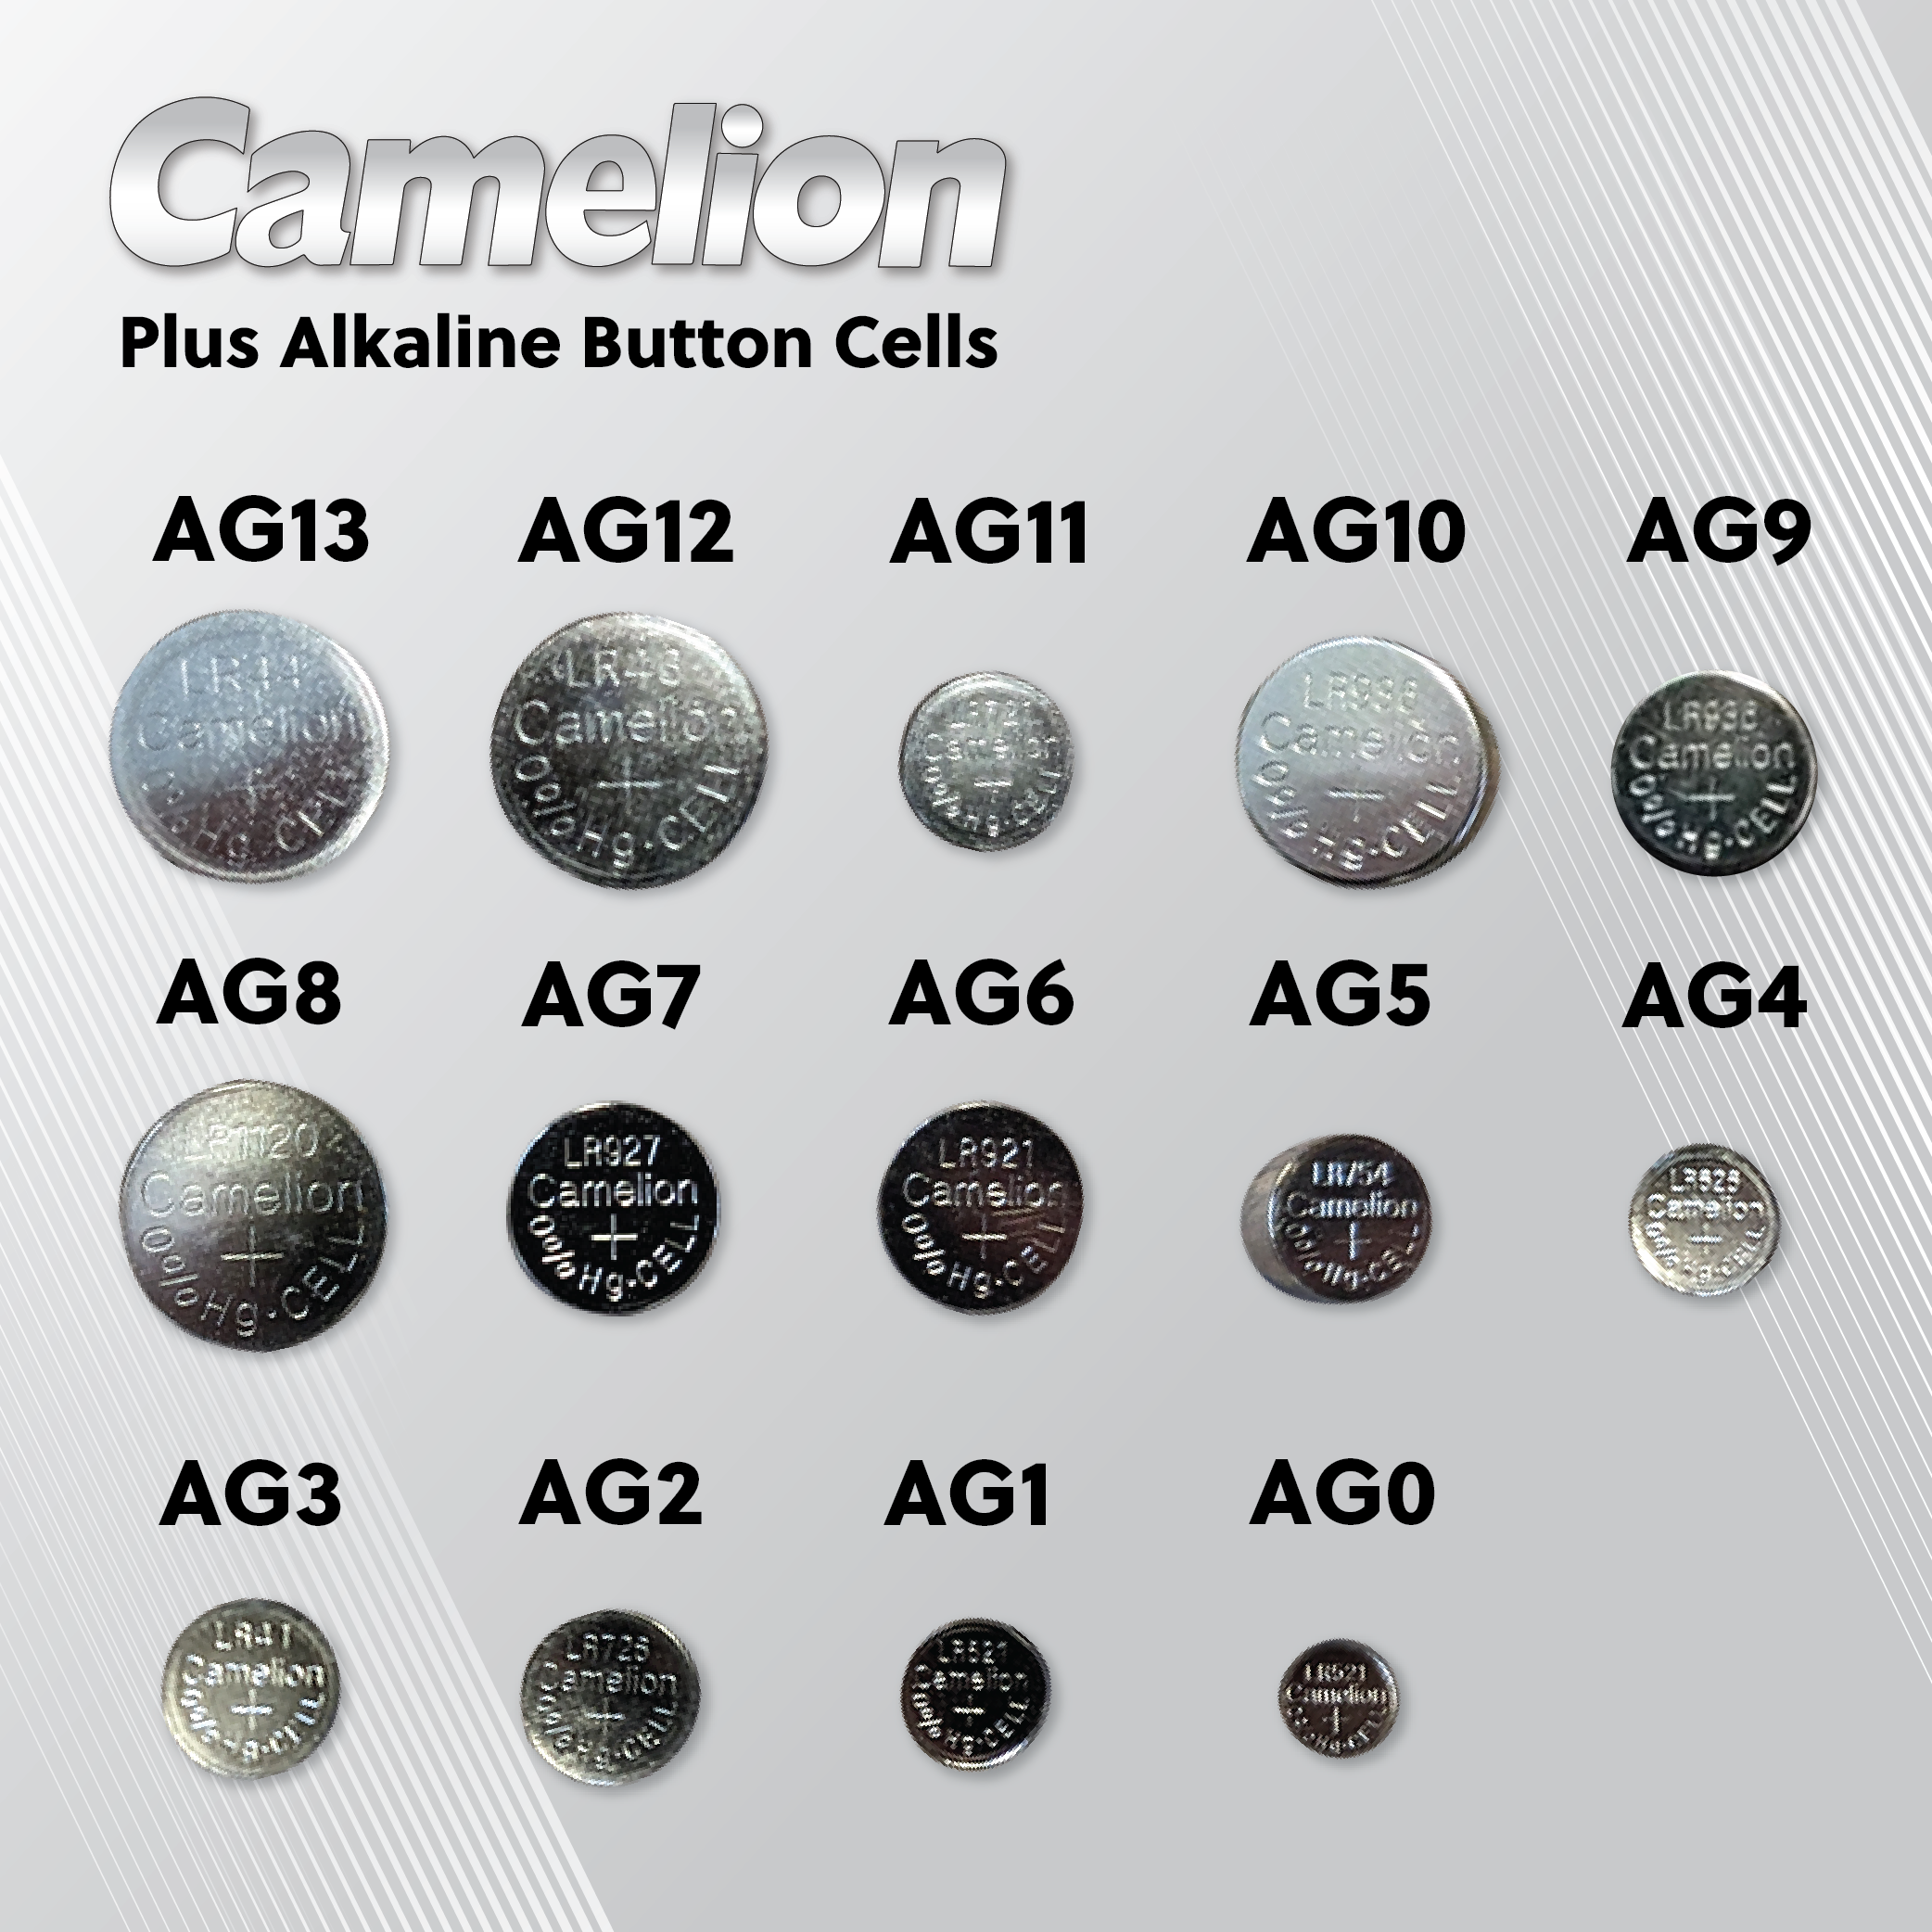 Camelion AG6 / 371 / LR921 1.5V Button Cell Battery (Two Packaging Options)